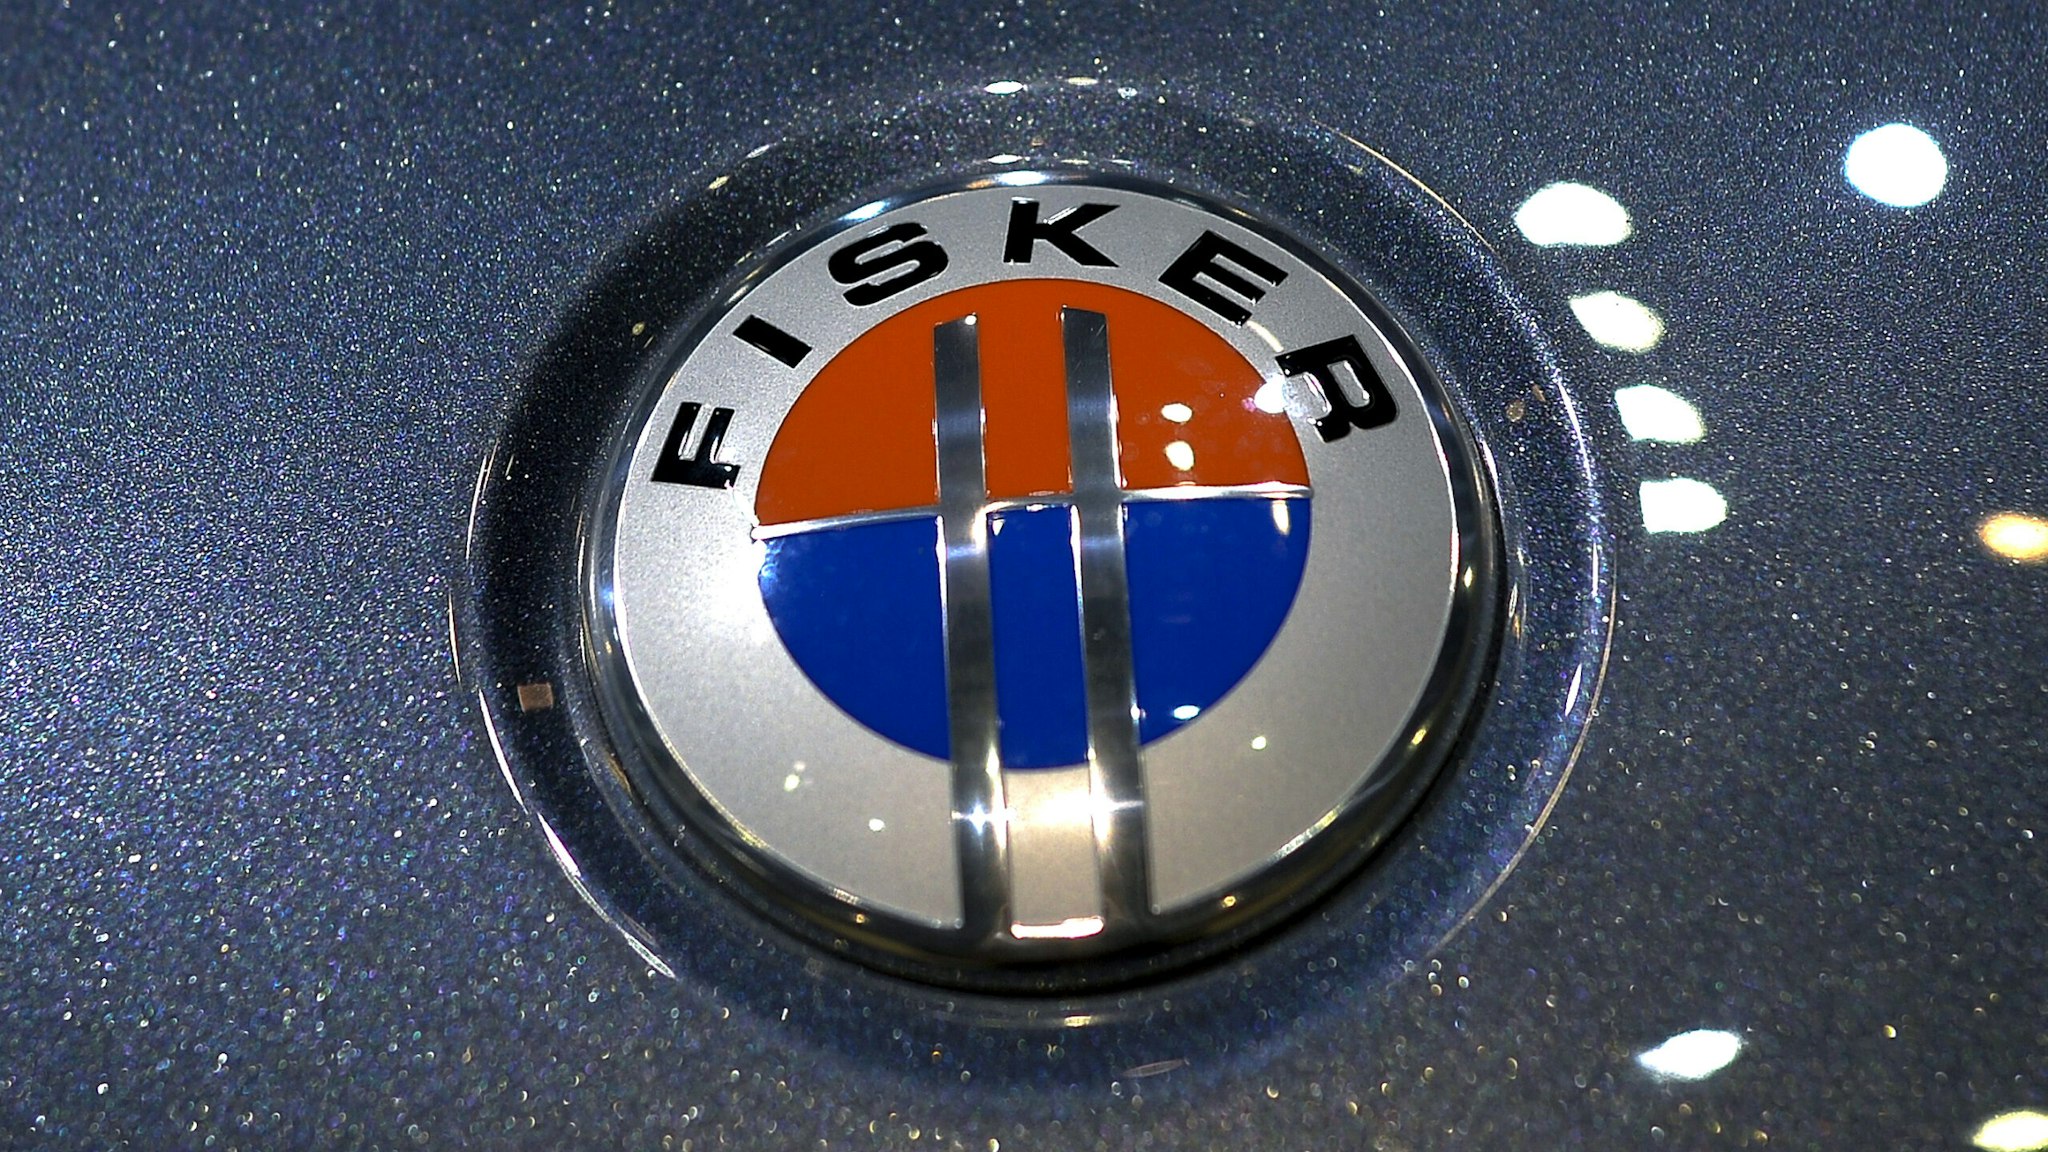 The emblem of a Fisker Karma electric car is seen at the US car maker's booth during the 83rd Geneva Motor Show on March 6, 2013. The European crisis hovered like a dark cloud over the Geneva International Motor Show, but there was no lack of new luxury cars shining on the showroom floor. McLaren, Ferrari and Lamborghini all unveiled so-called supercars to be sold for between one to three million euros ($1.3 - $3.9 million). AFP PHOTO / FABRICE COFFRINI